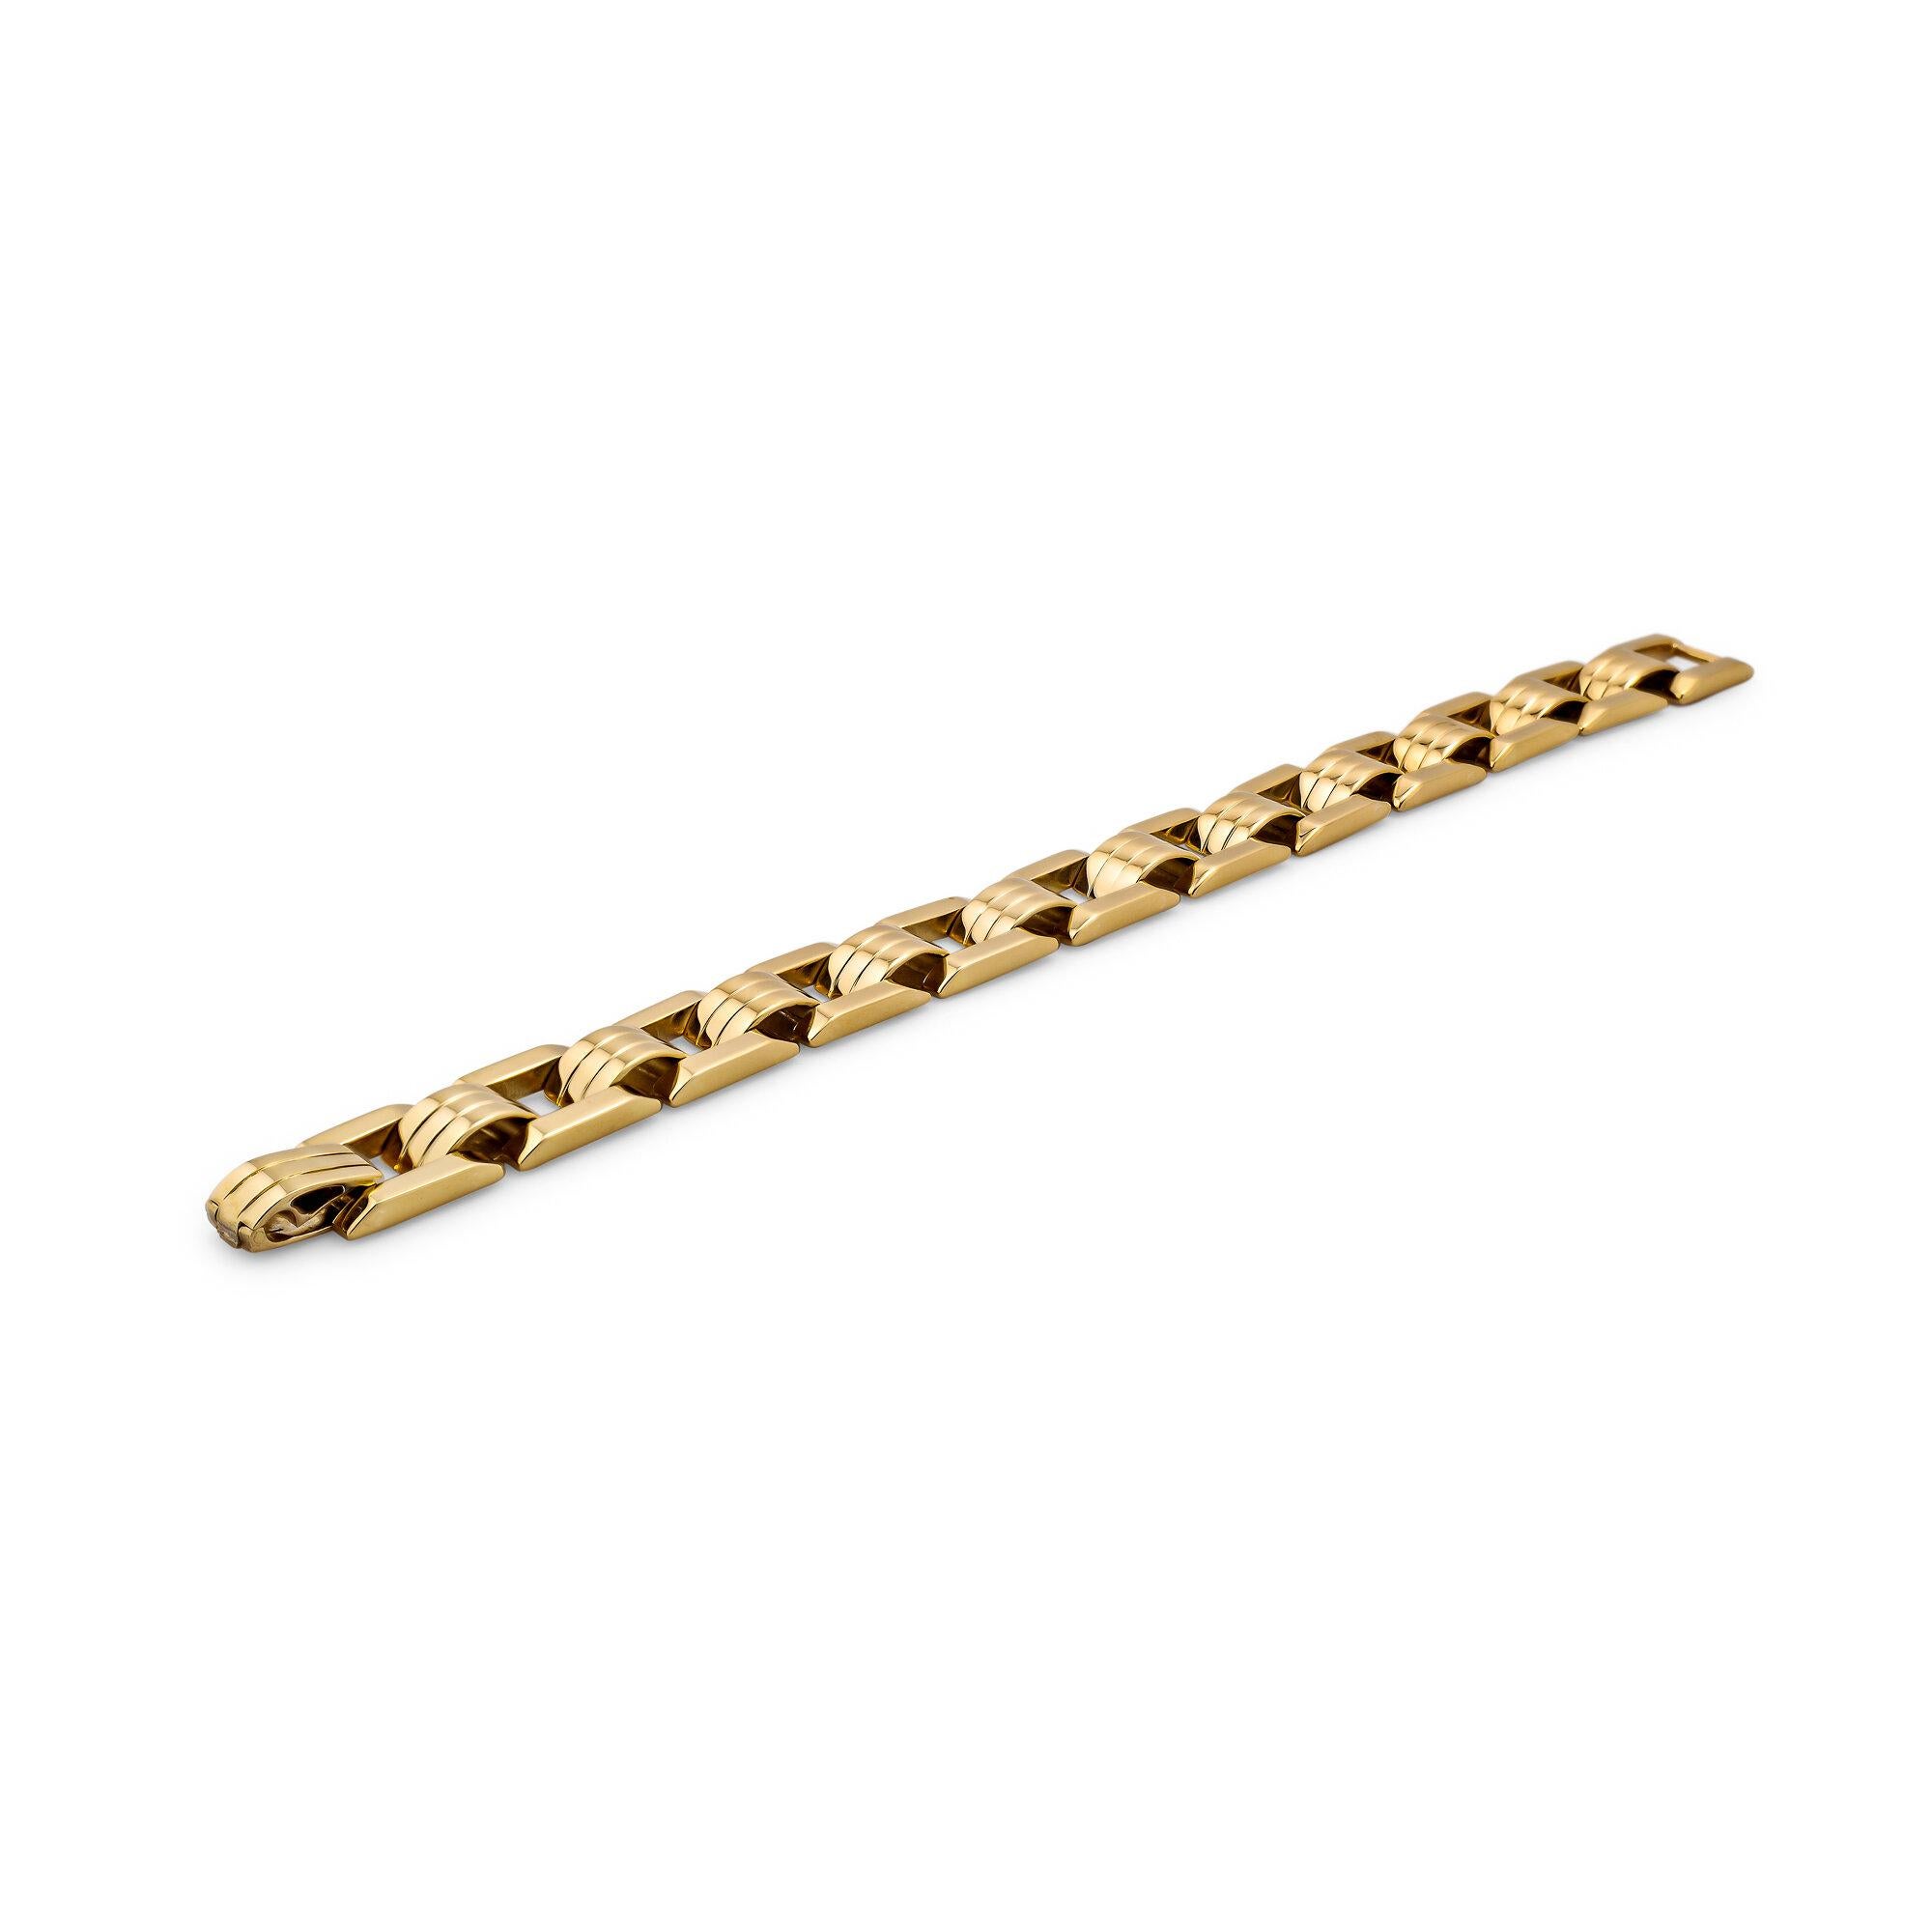 This mid-century, circa 1935-40, small link gold track bracelet looks as if it was created today using American railway tracks as the design inspiration.  With a series of square train track links, alternating with ridged half dome connectors, this